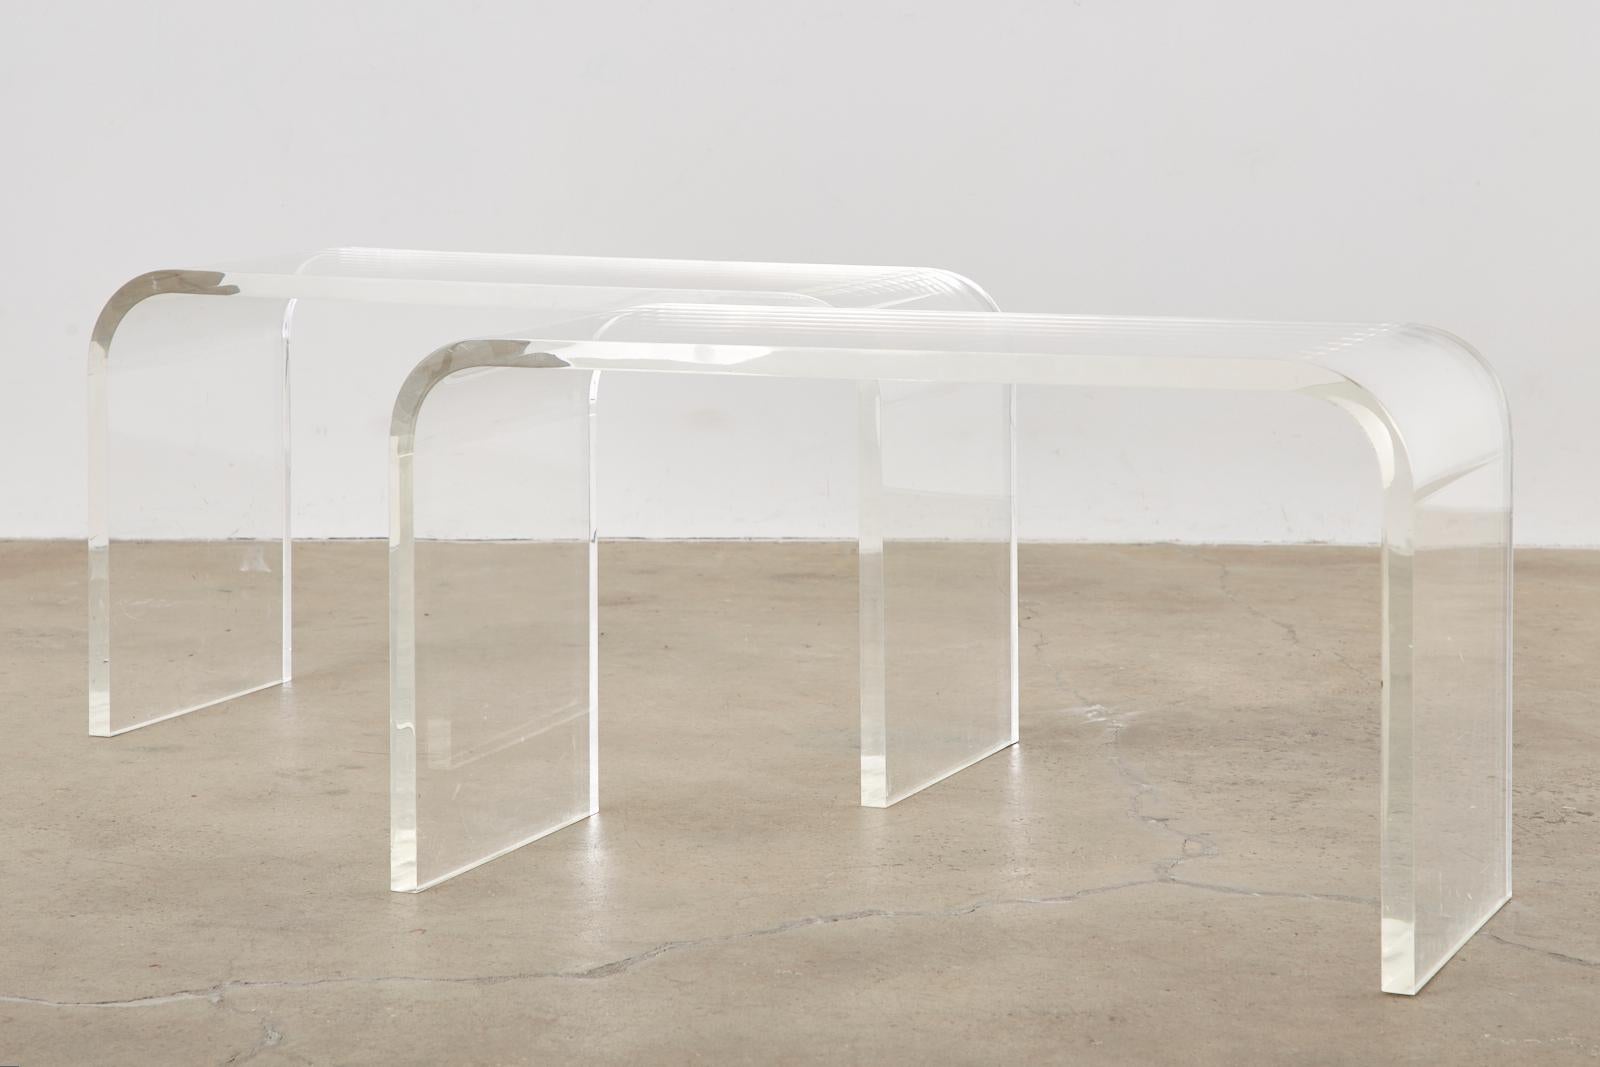 Pair of Modern Lucite Waterfall Benches or Drink Tables In Good Condition For Sale In Rio Vista, CA